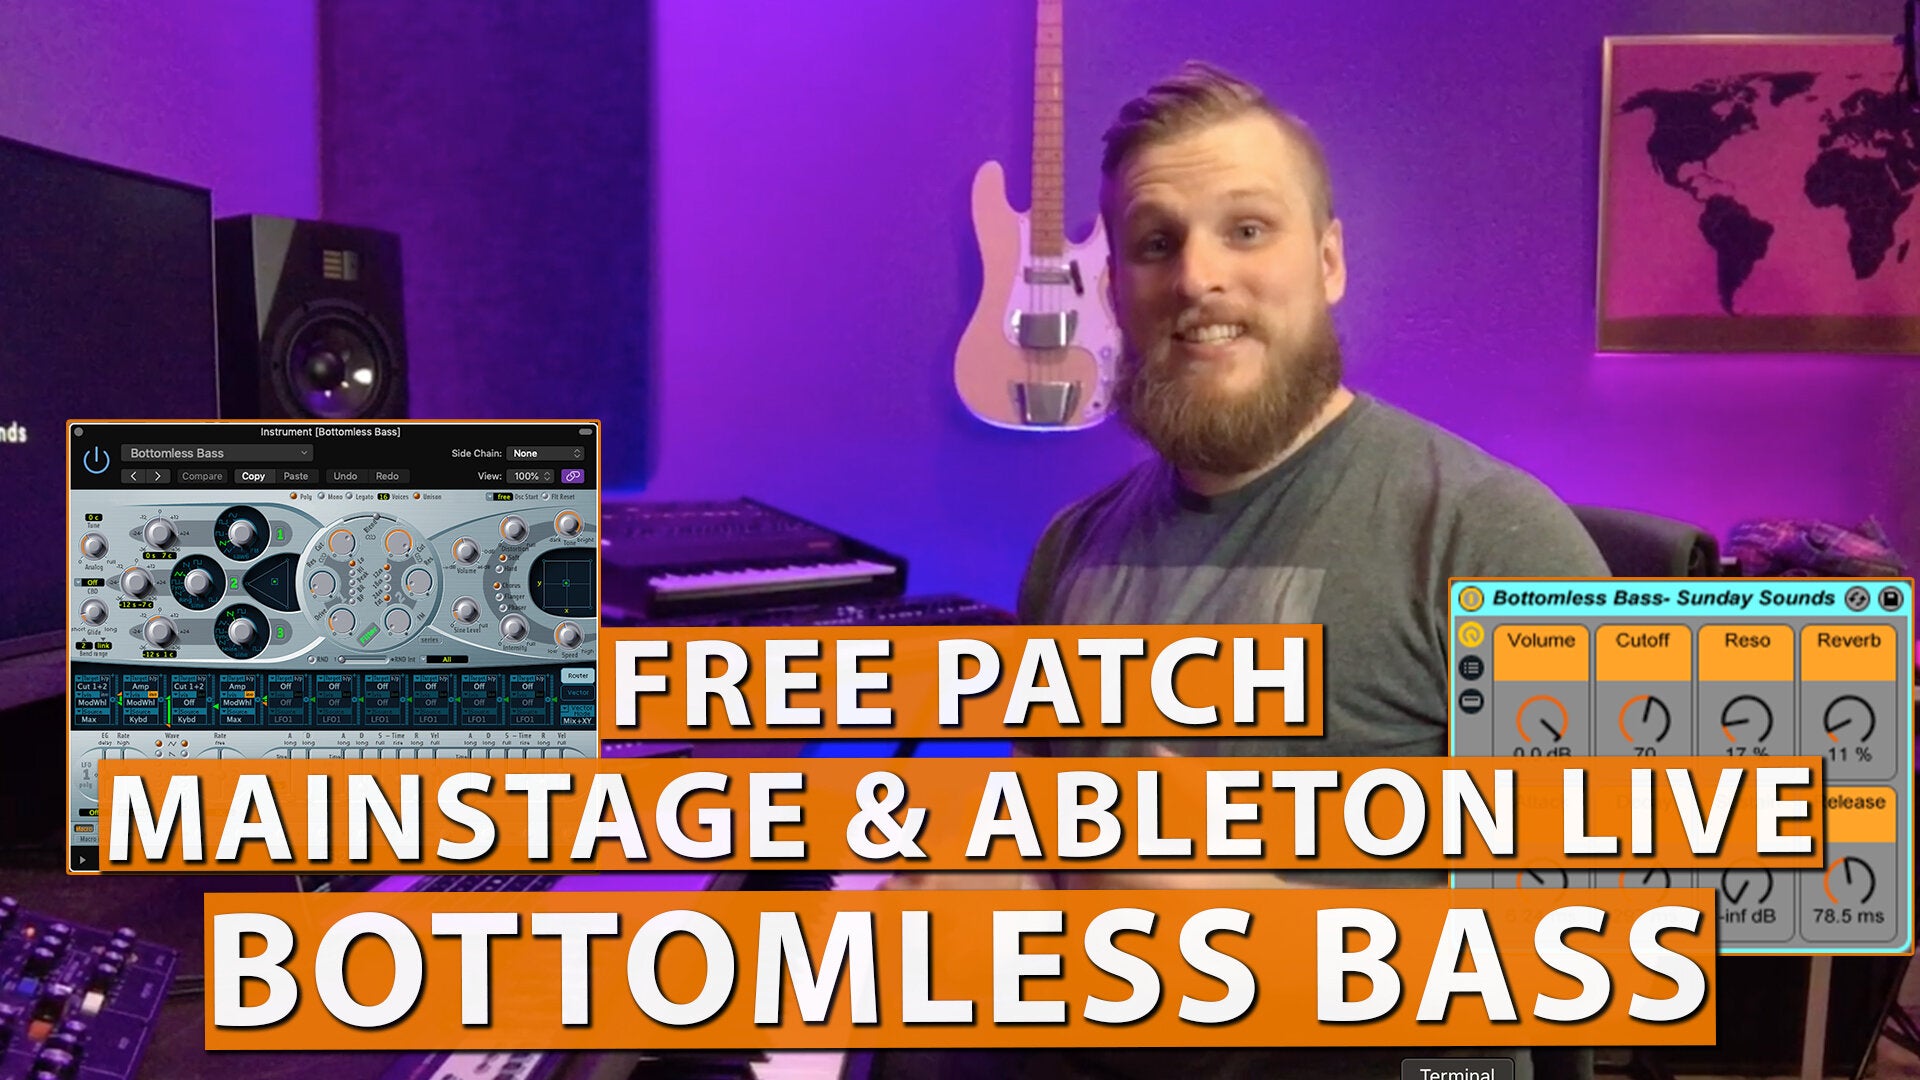 Free MainStage & Ableton Worship Patch! - Bottomless Bass